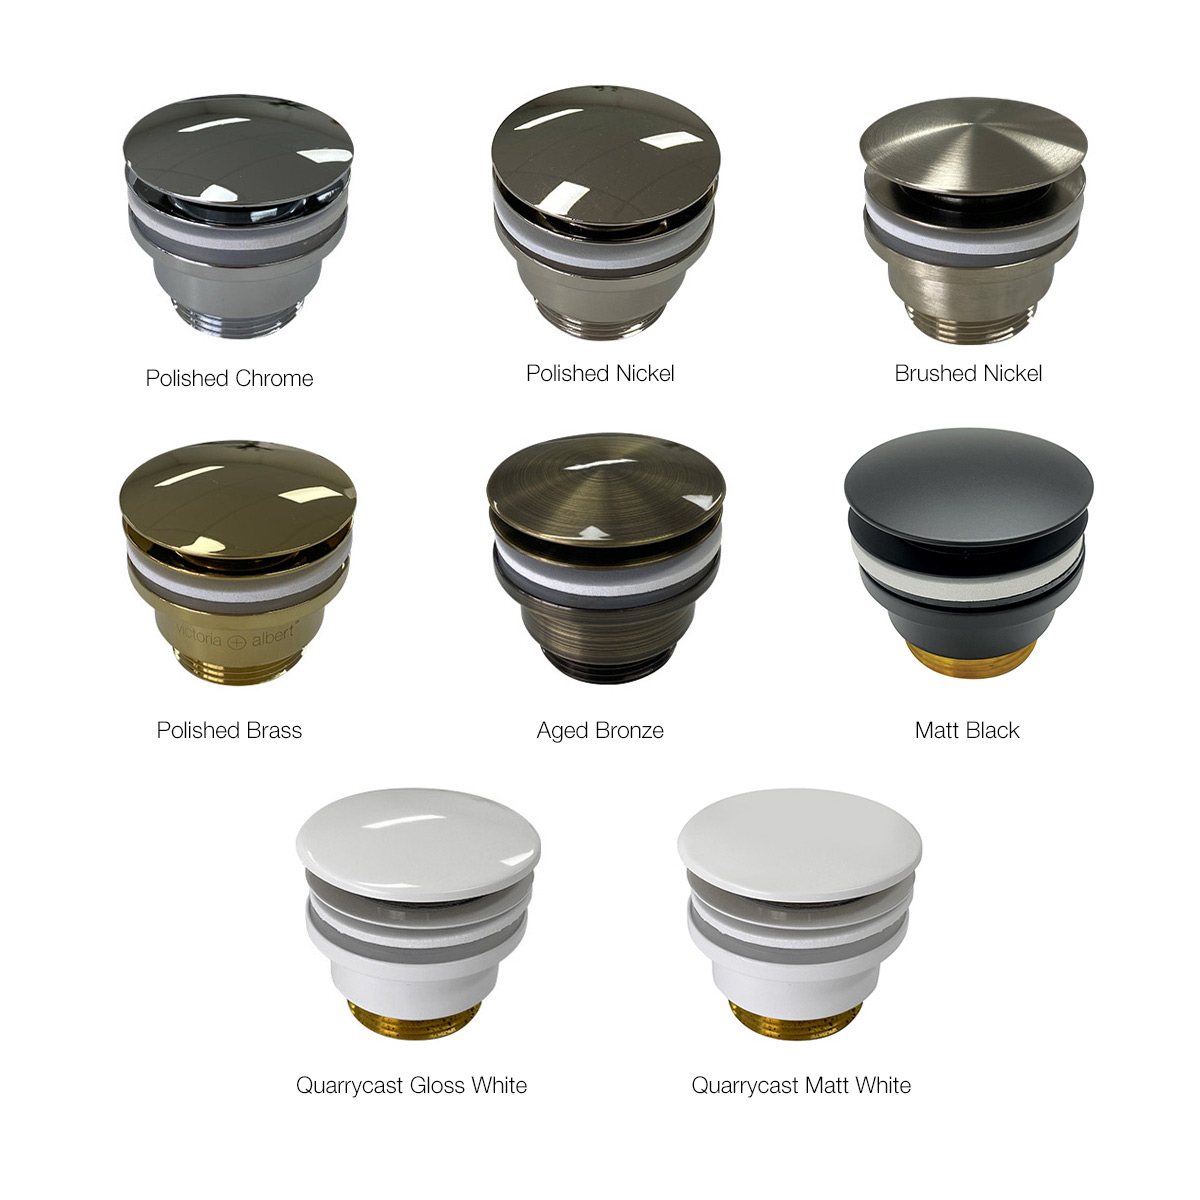 Victoria + Albert Kit 25 universal basin waste finishes. Distributed in Australia by Luxe by Design, Brisbane.